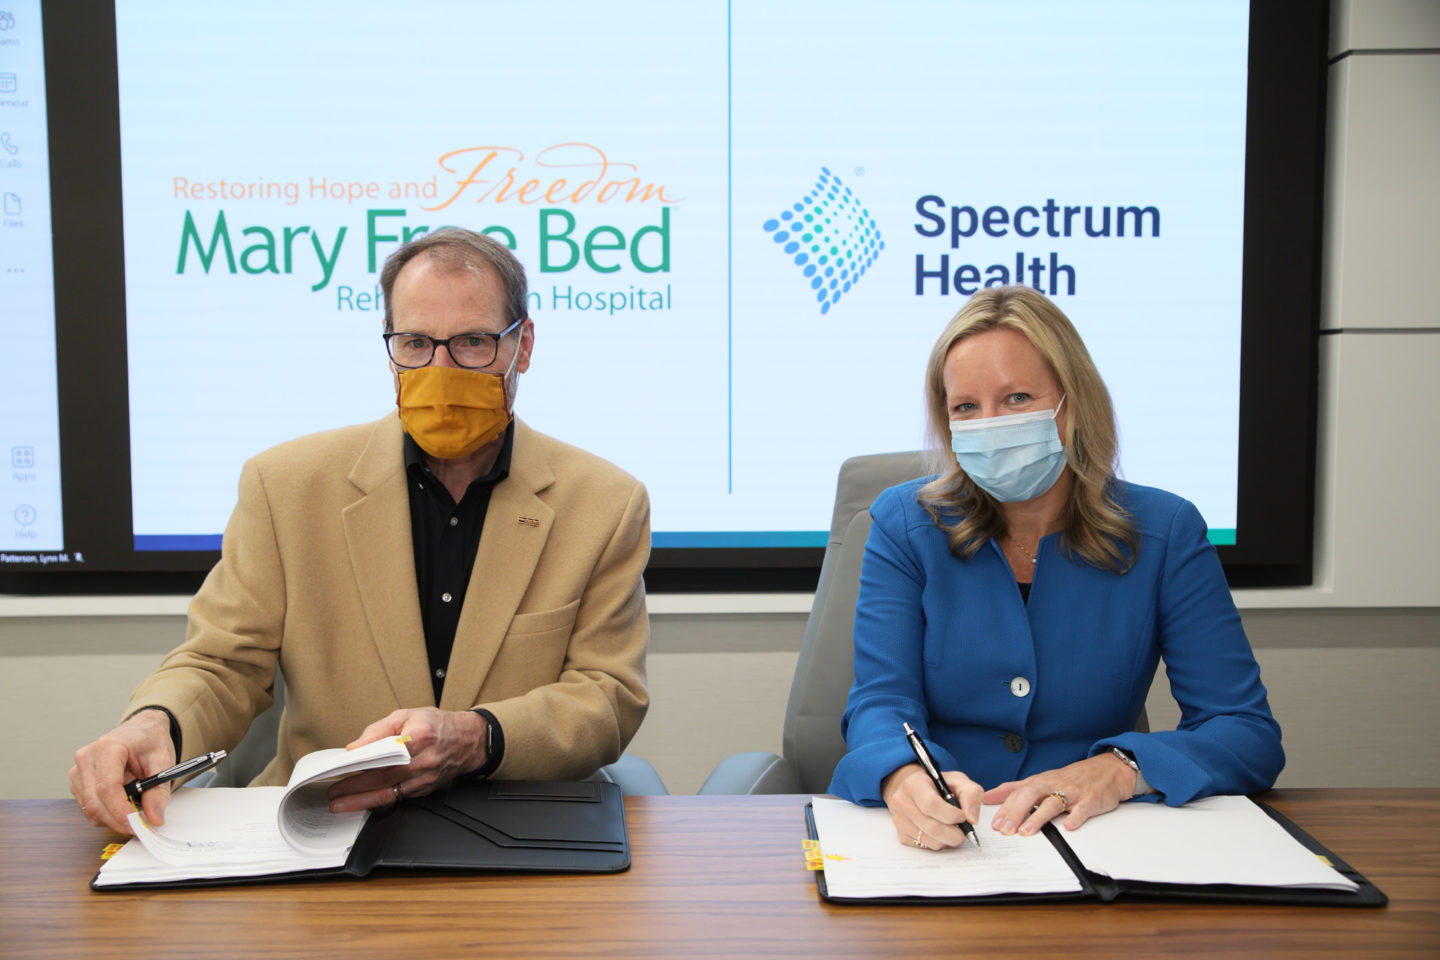 Mary Free Bed CEO Kent Riddle and Spectrum Health President & CEO Tina Freese Decker sign new collaboration agreement for acute pediatric rehabilitation